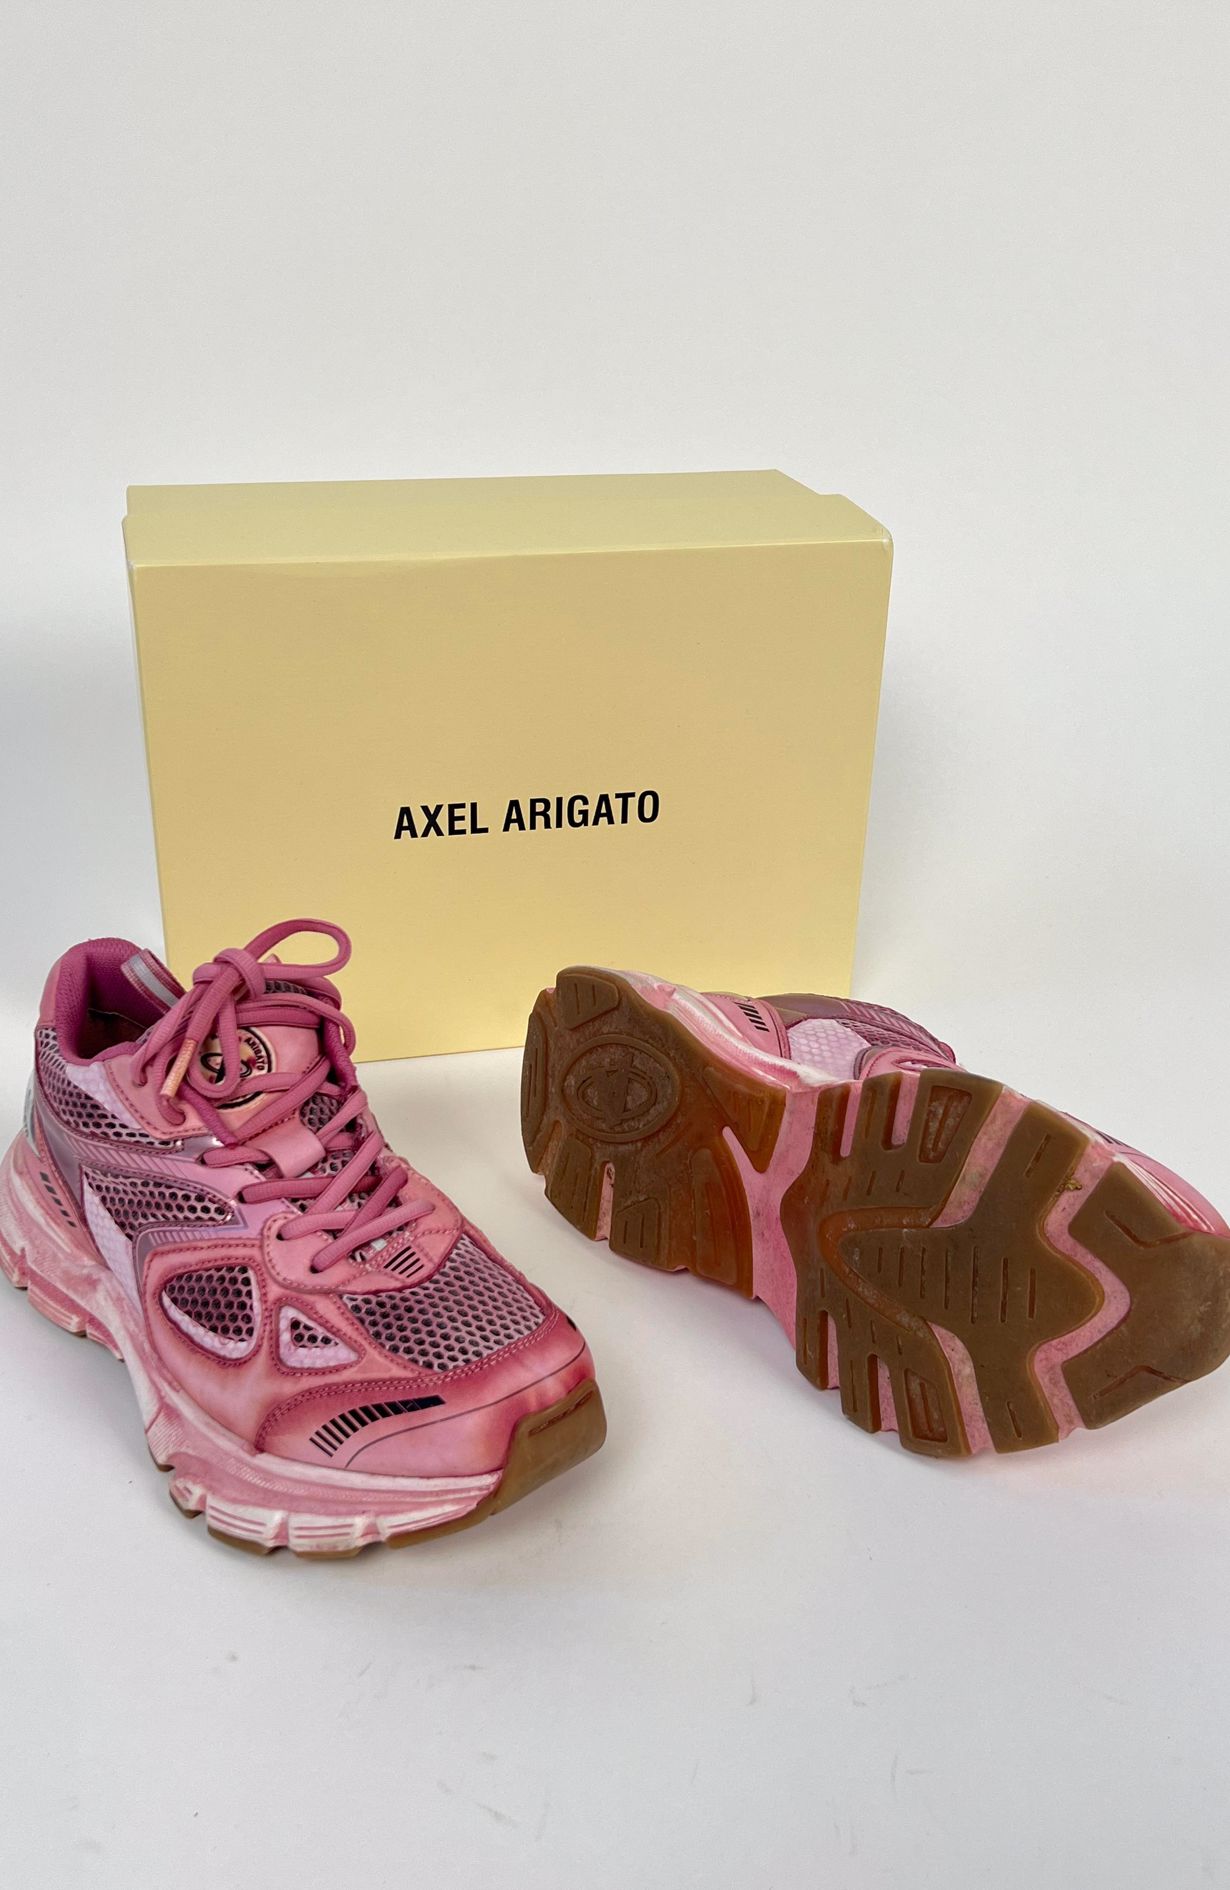 Axel Arigato sneakers pink size 40 +box